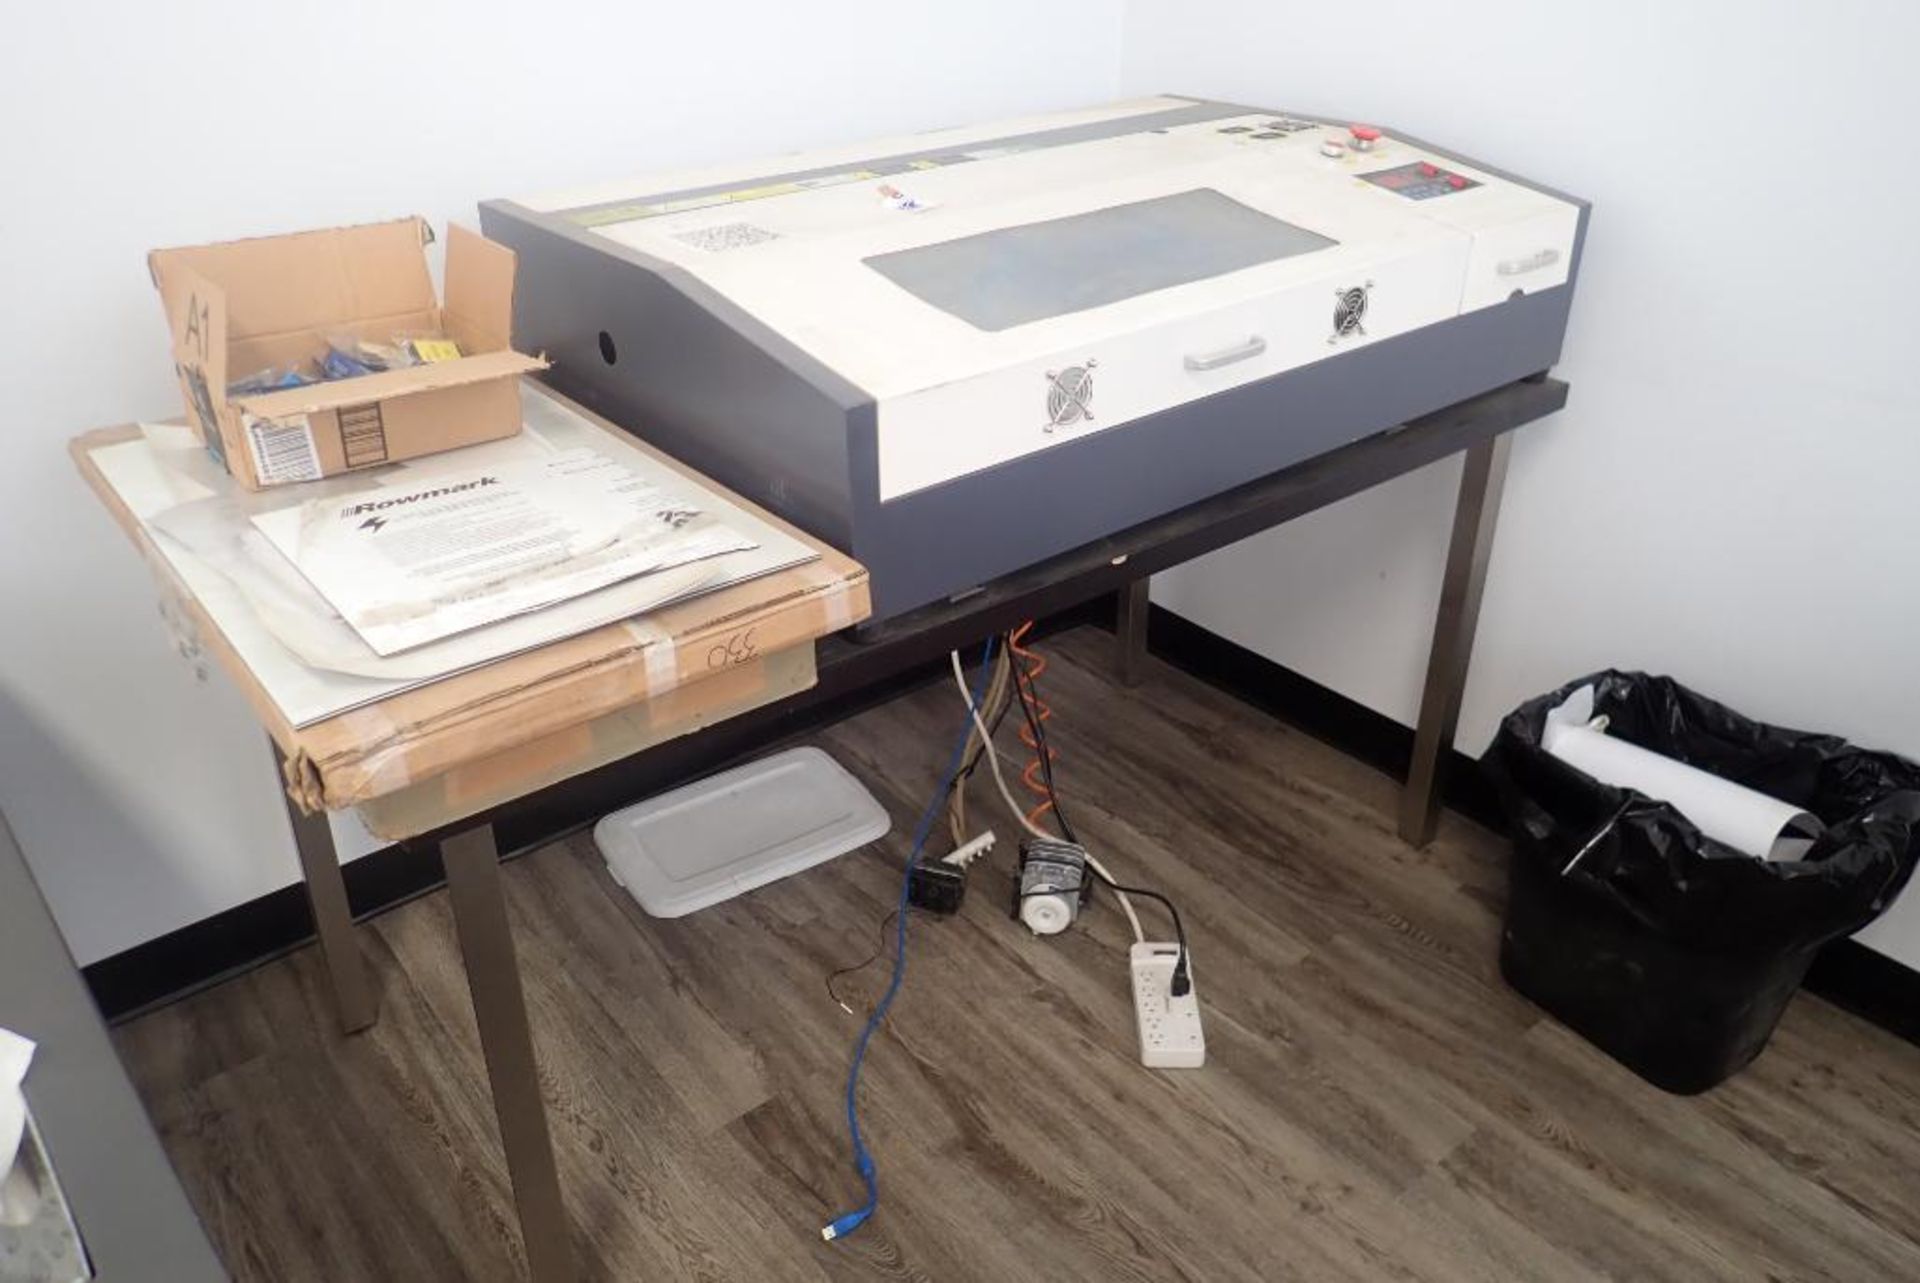 Ten-High Laser Engraver w/USB and Work Table.